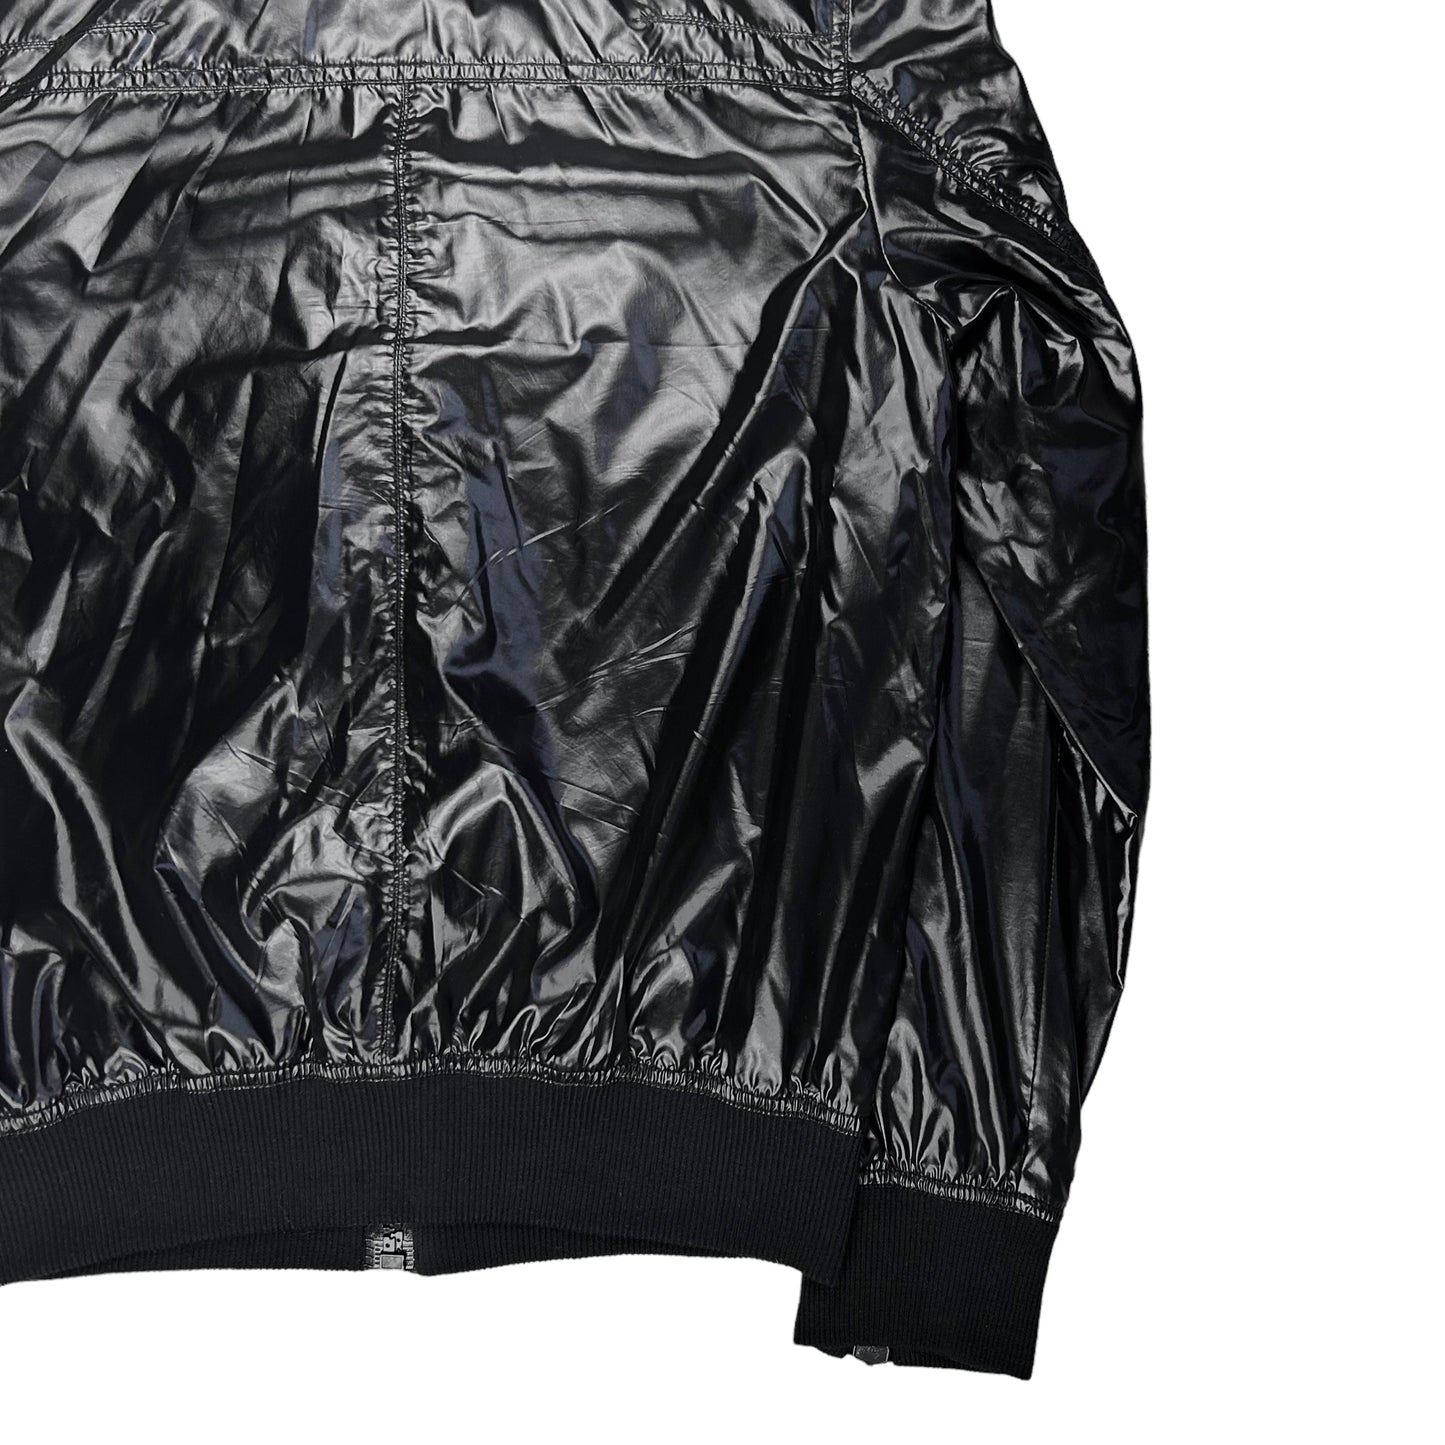 Dior Homme Glowing Cargo Bomber Jacket - SS09